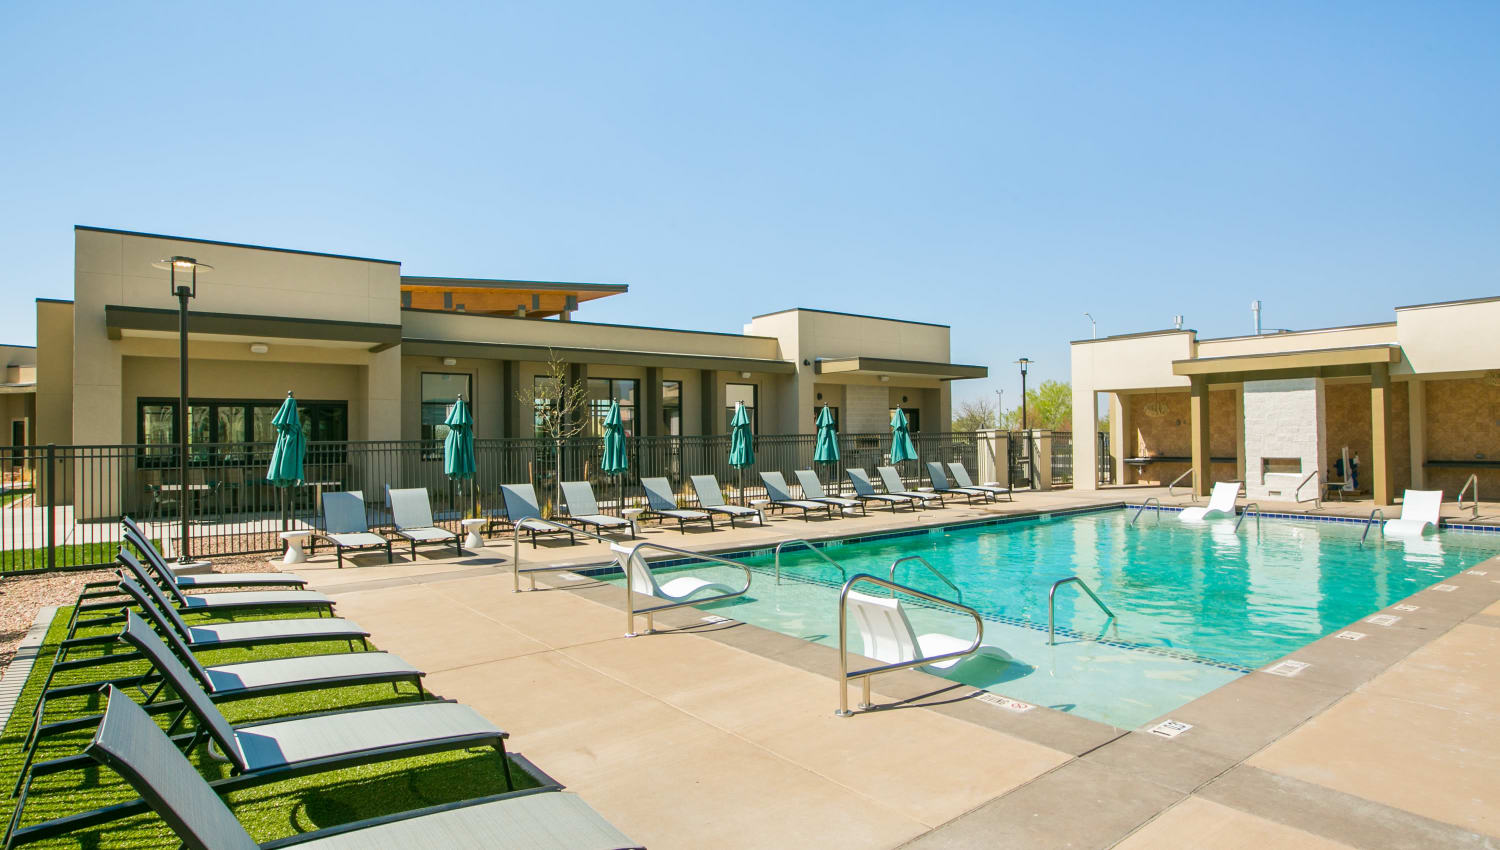 Resort style pool with lounge chairs at Olympus de Santa Fe, Santa Fe, New Mexico